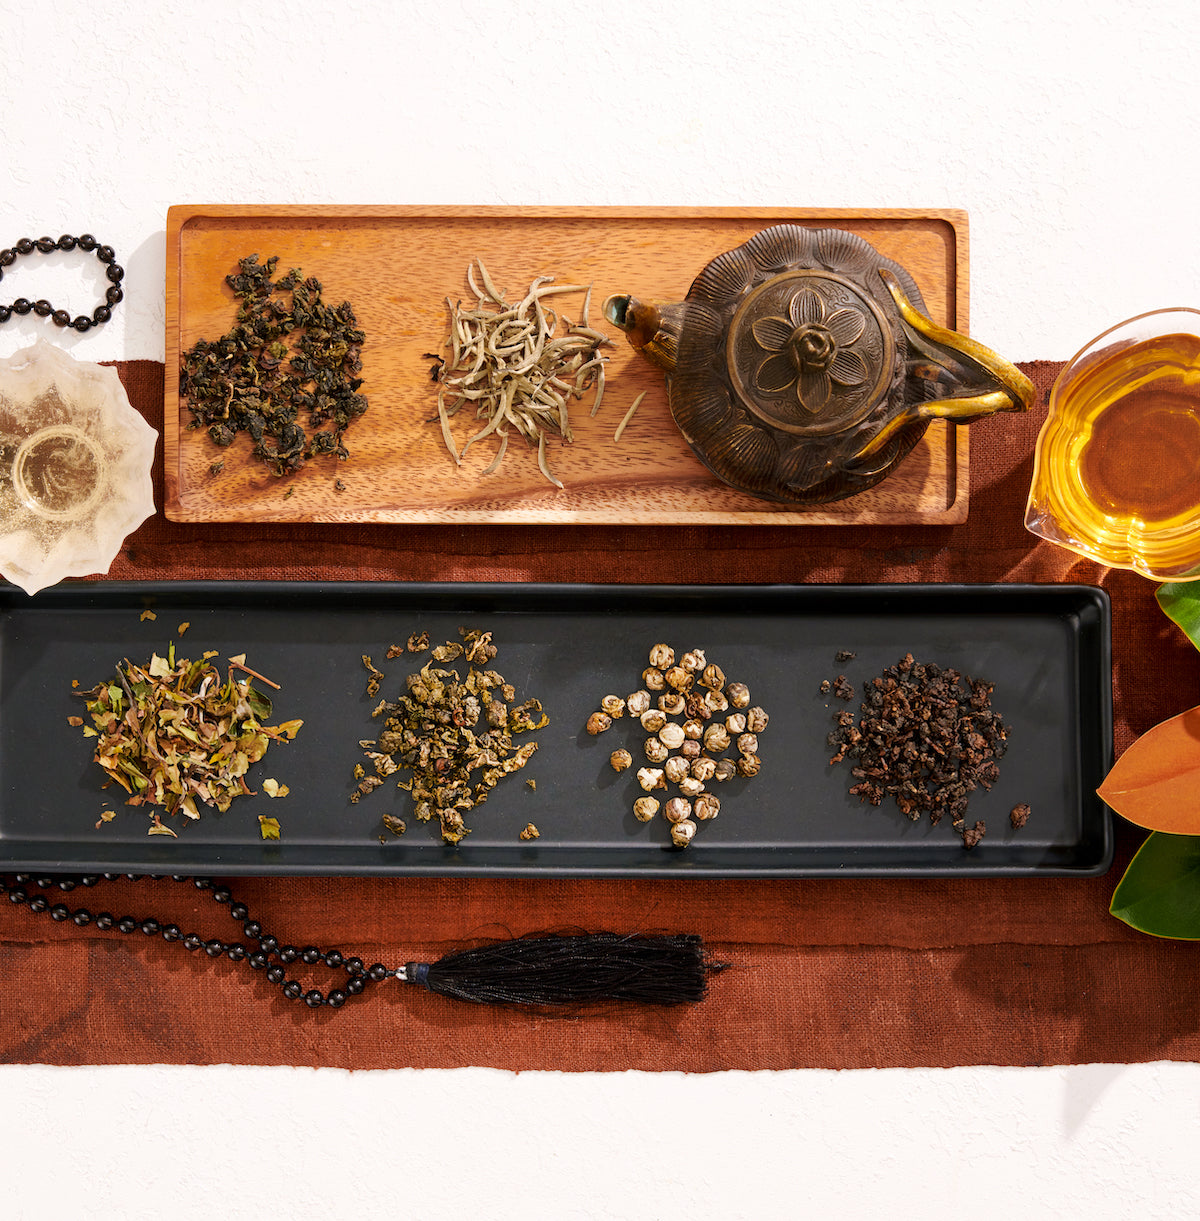 Unscented & Unblended Teas - Magic Hour